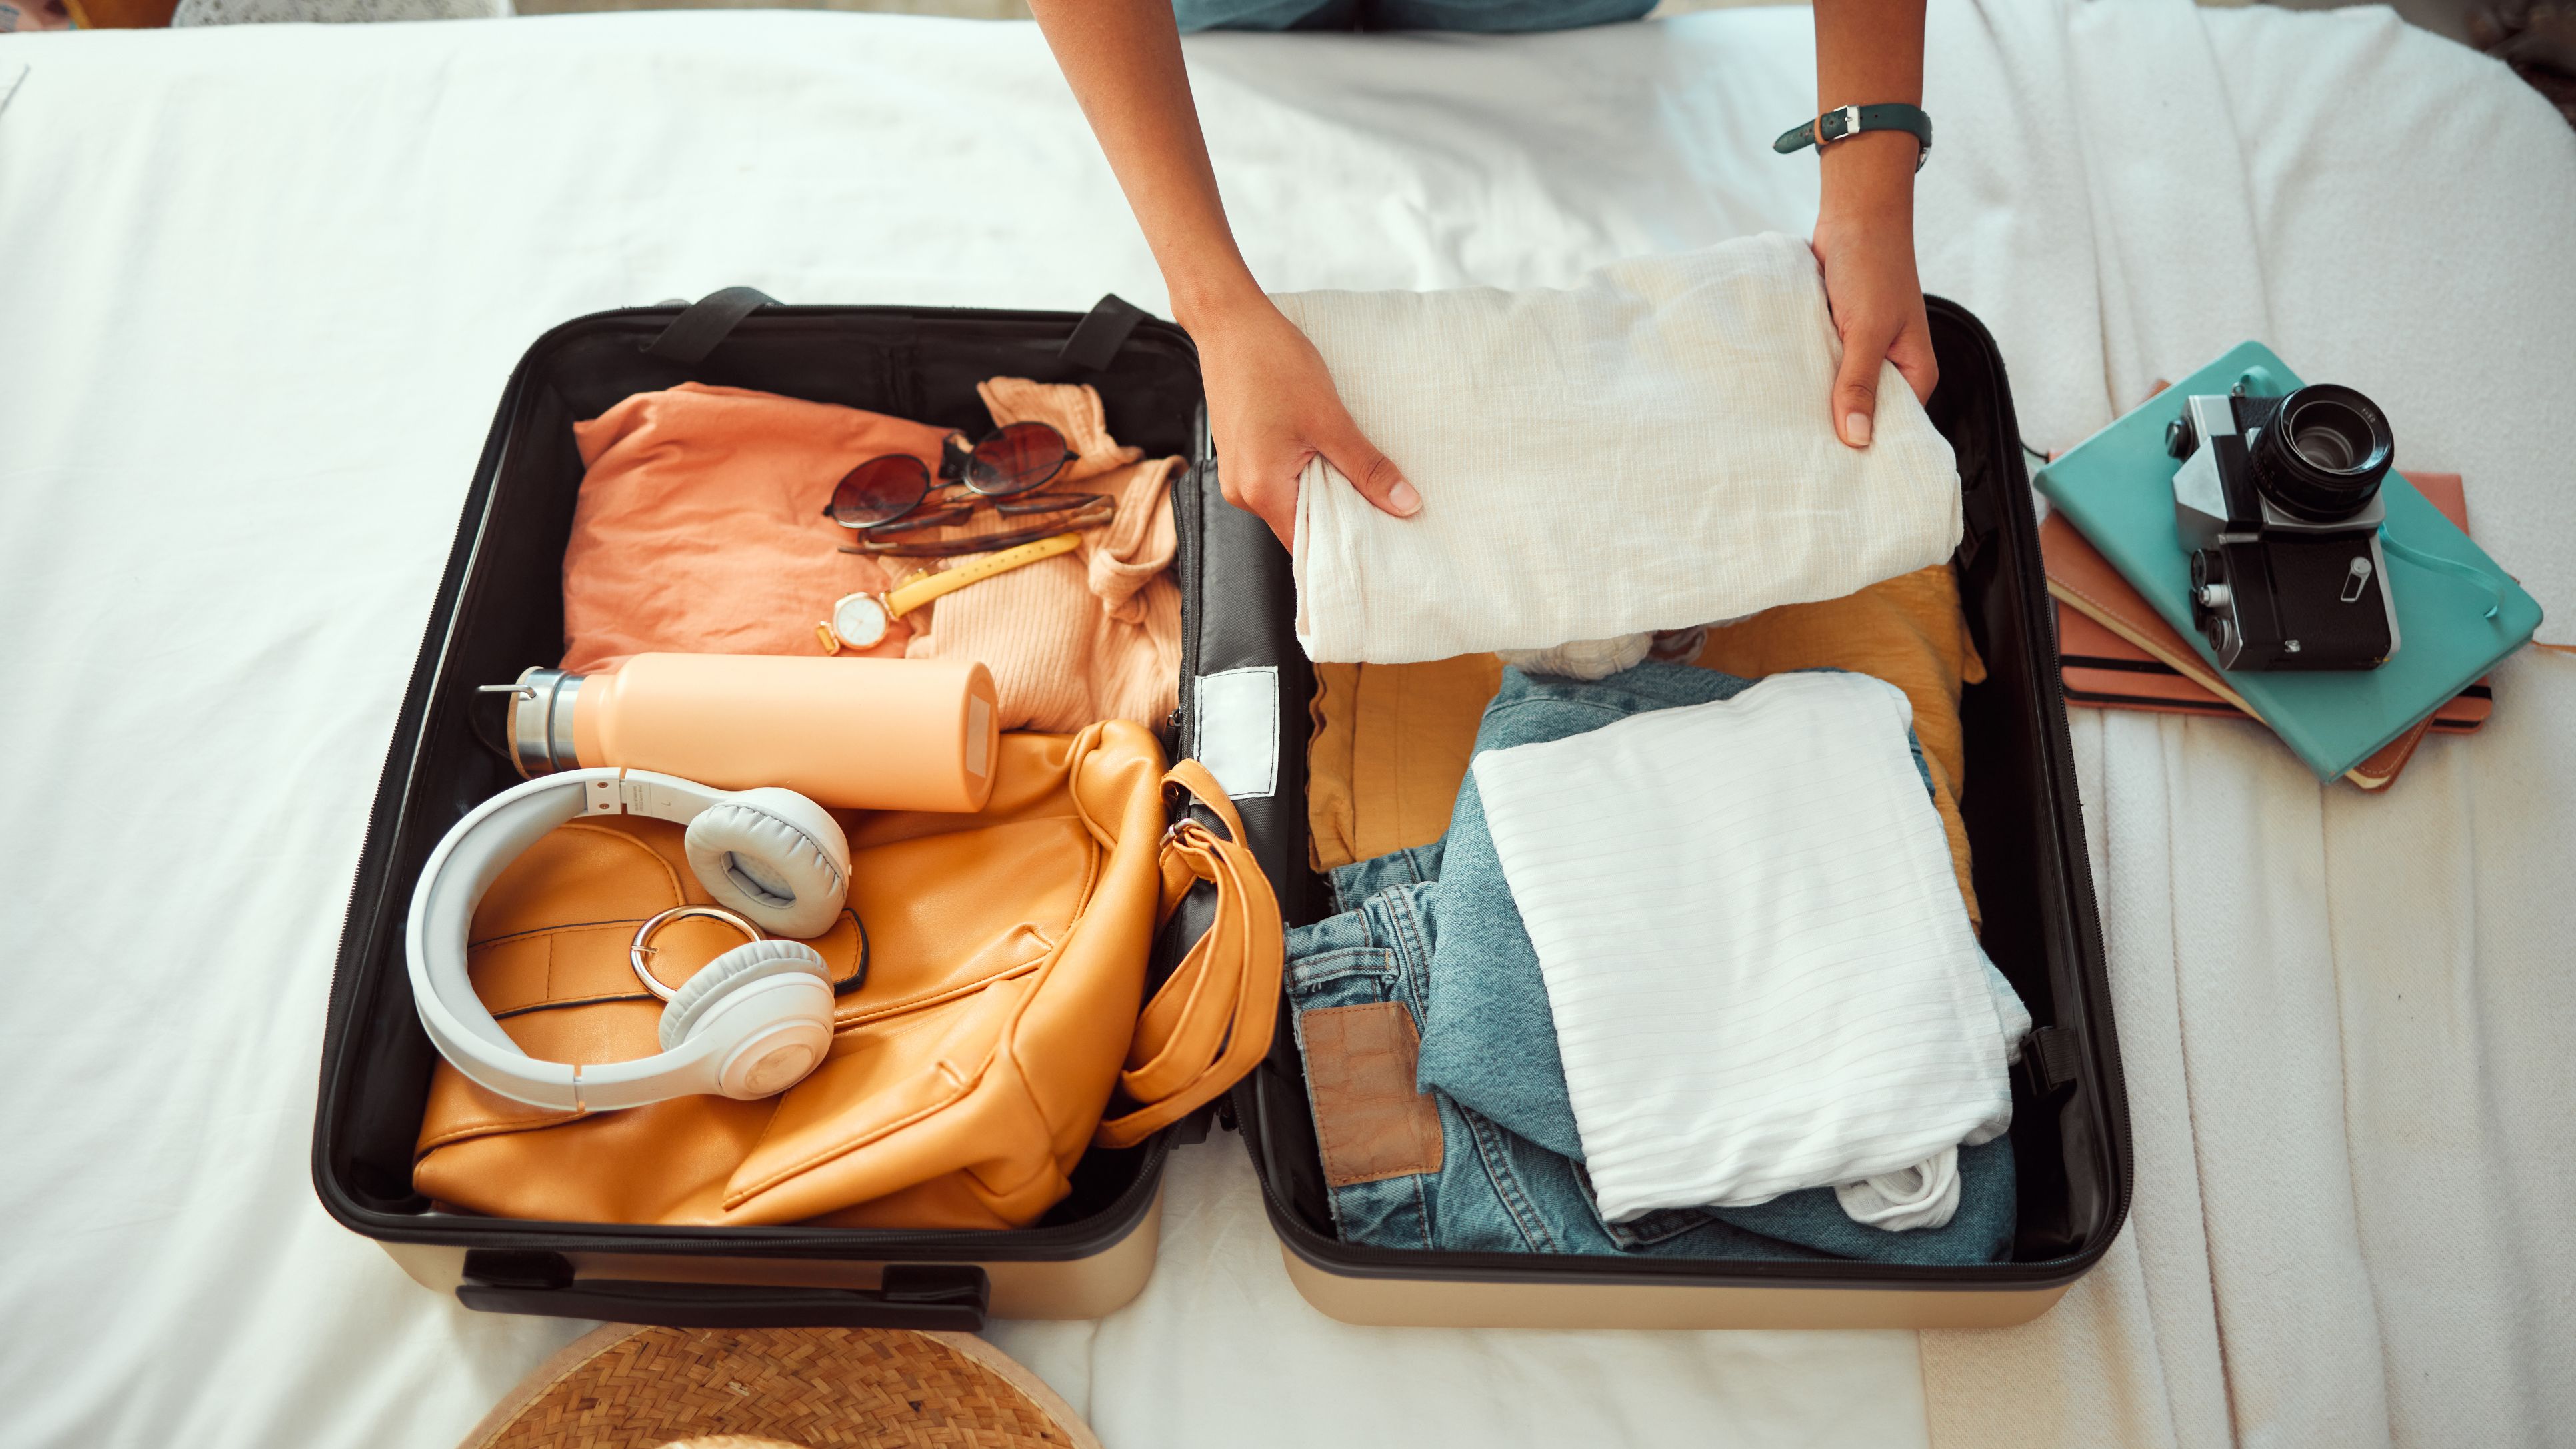 15 Carry-On Travel Essentials